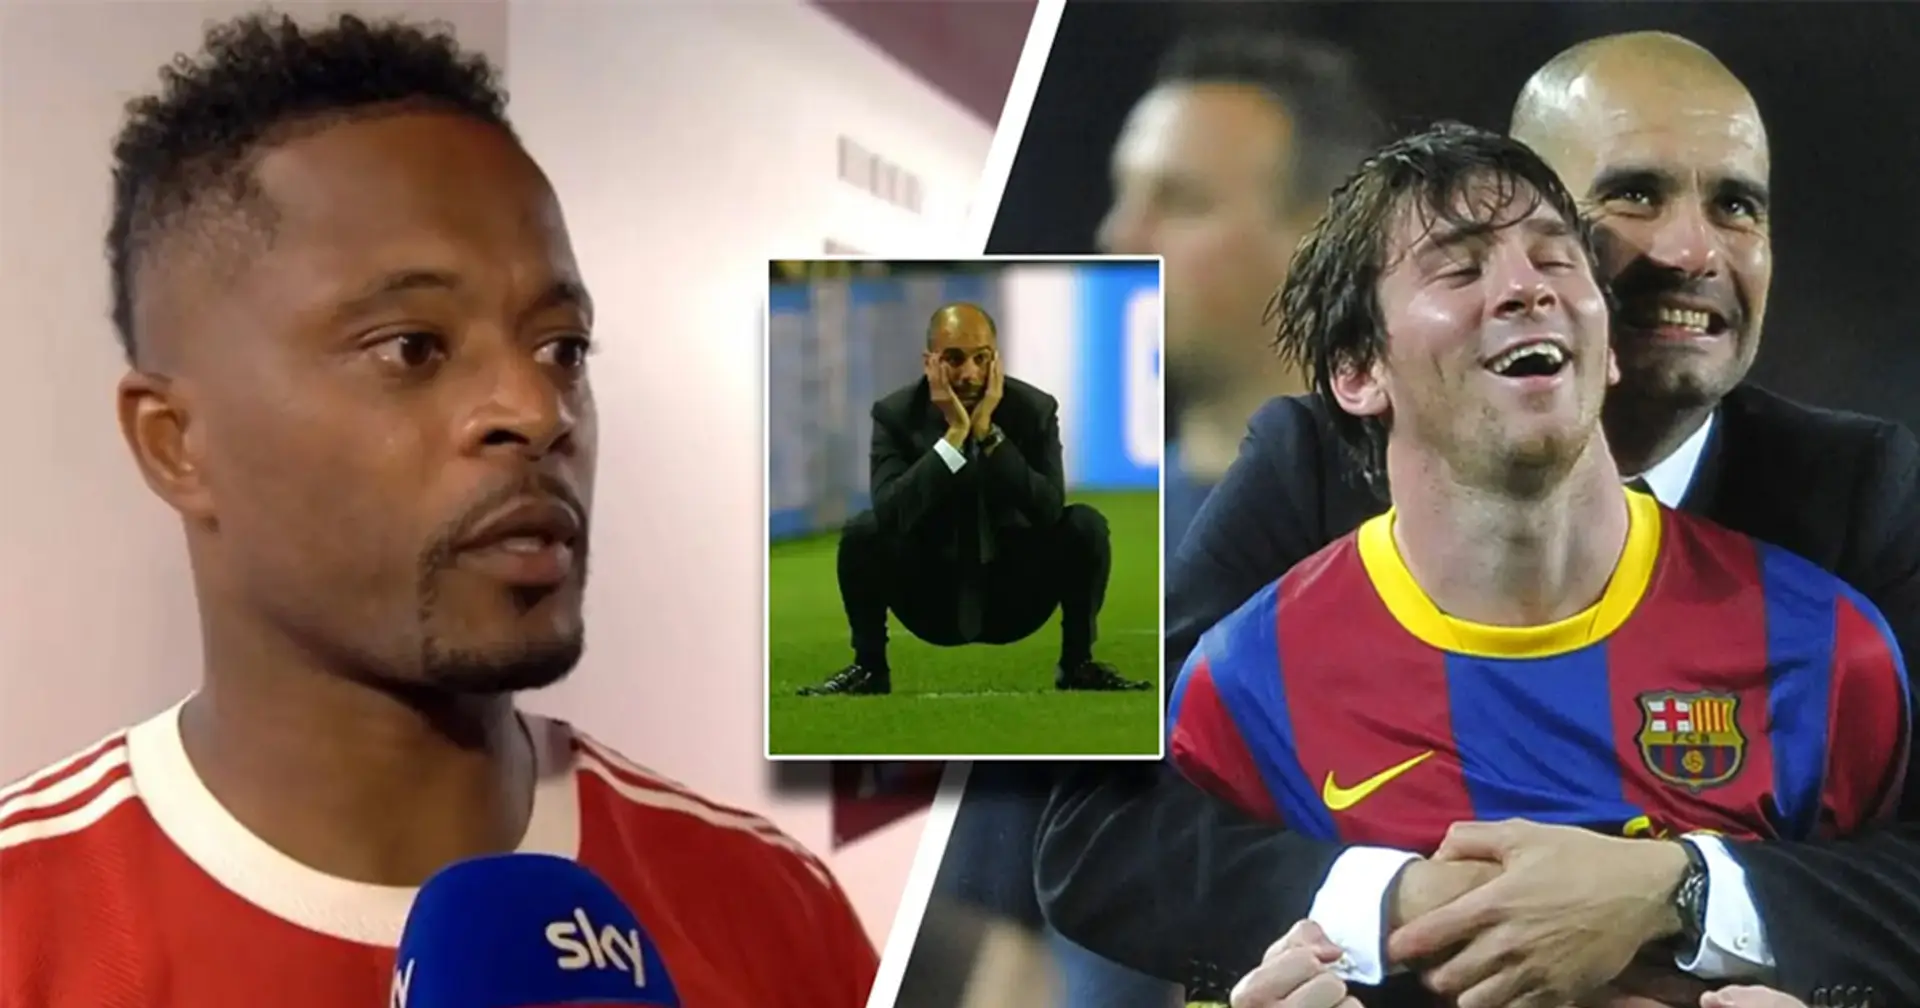 'He won Champions League because he had Messi': Patrice Evra's brutal response to Pep Guardiola jibe